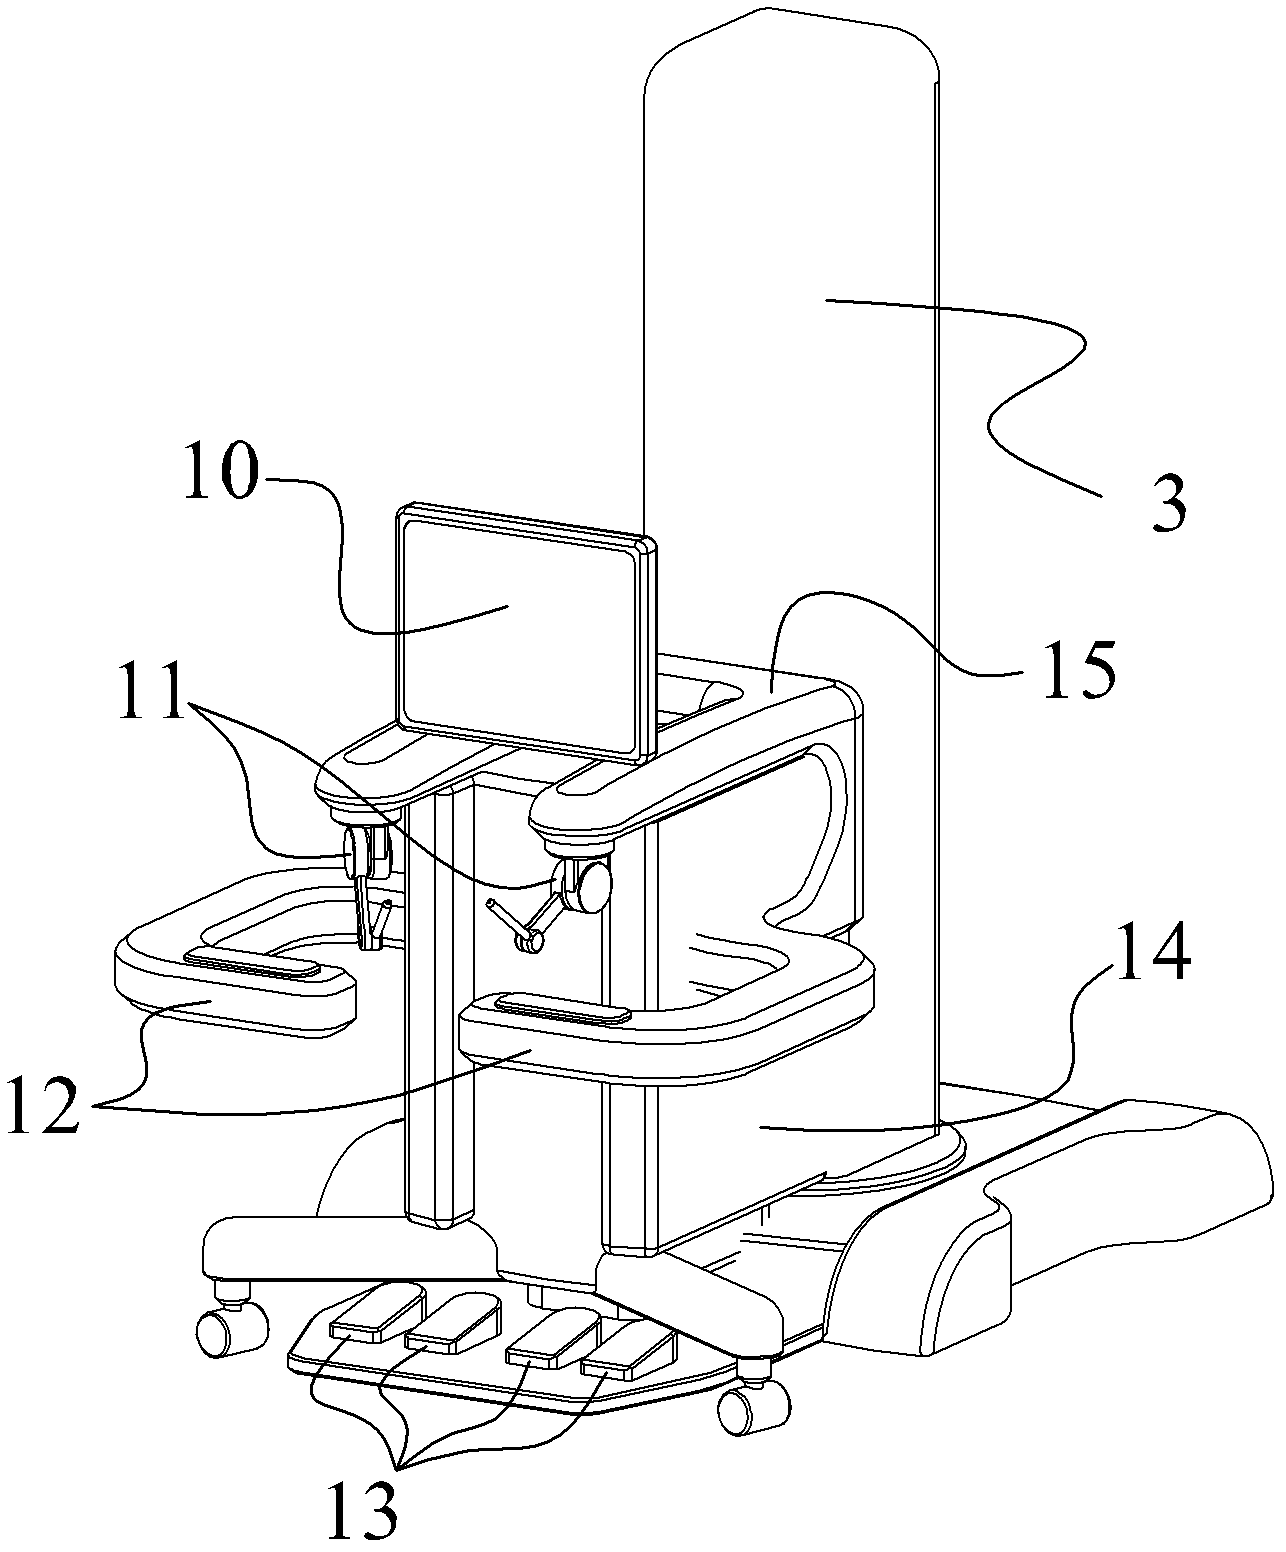 Arrangement structure for mechanical arm of minimally invasive surgery robot